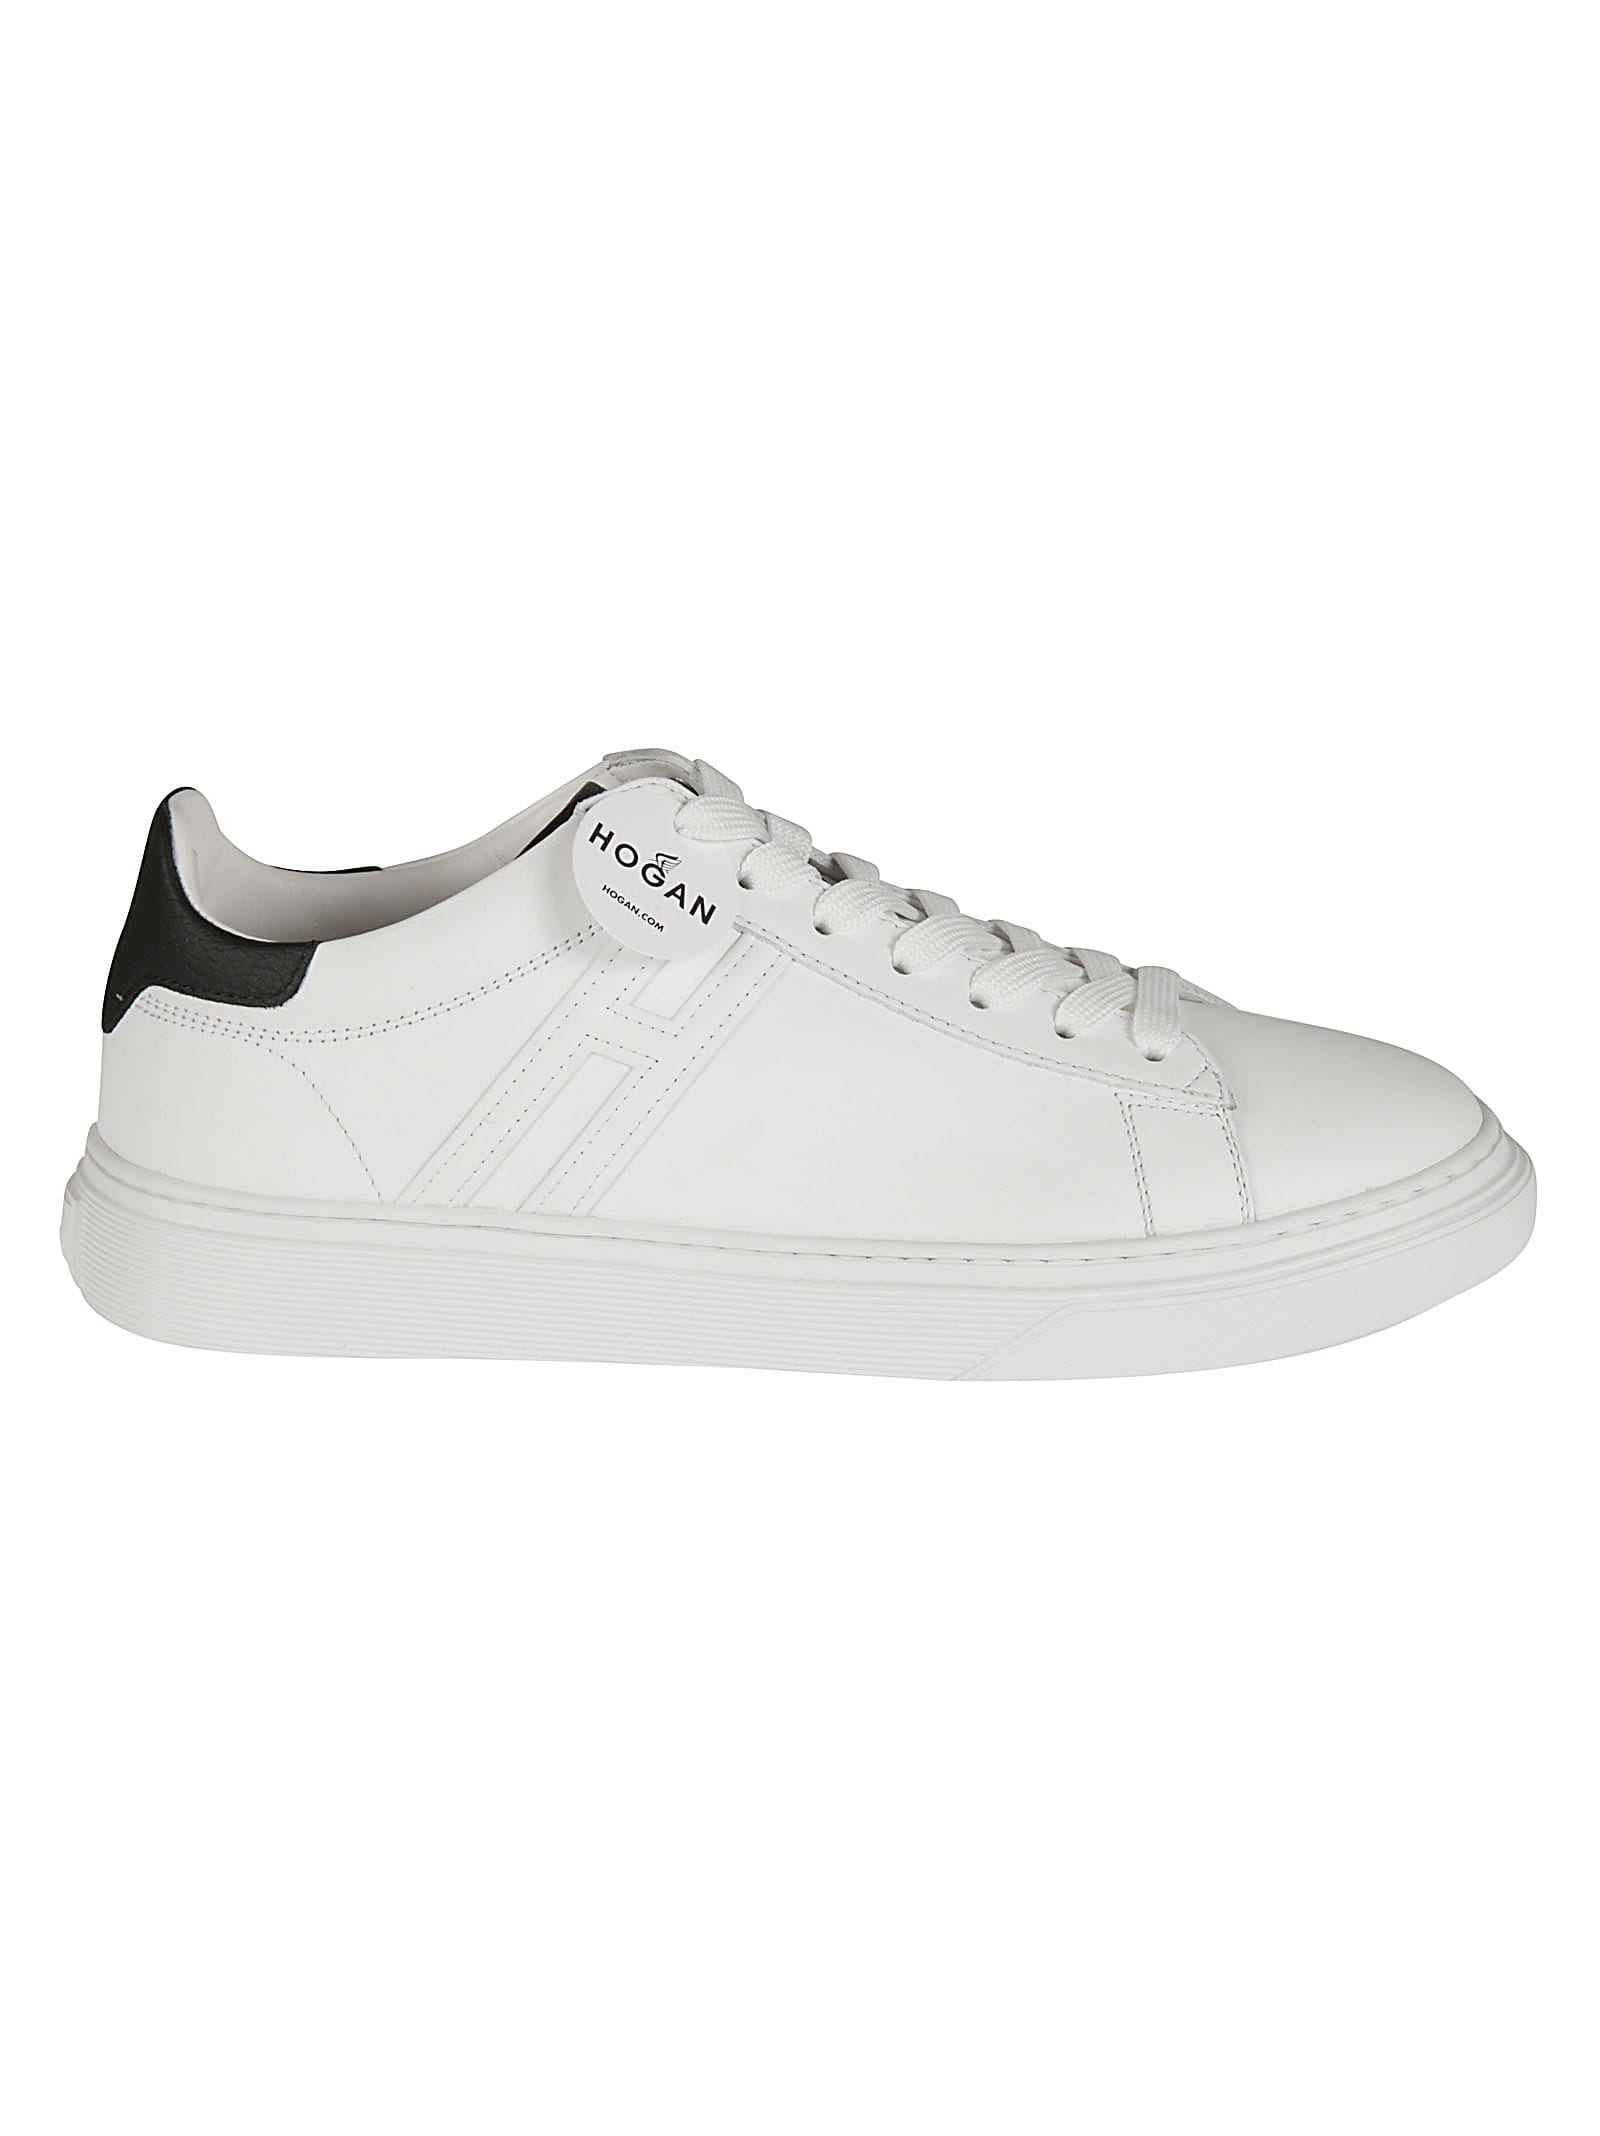 Hogan H365 Canaletto Sneakers